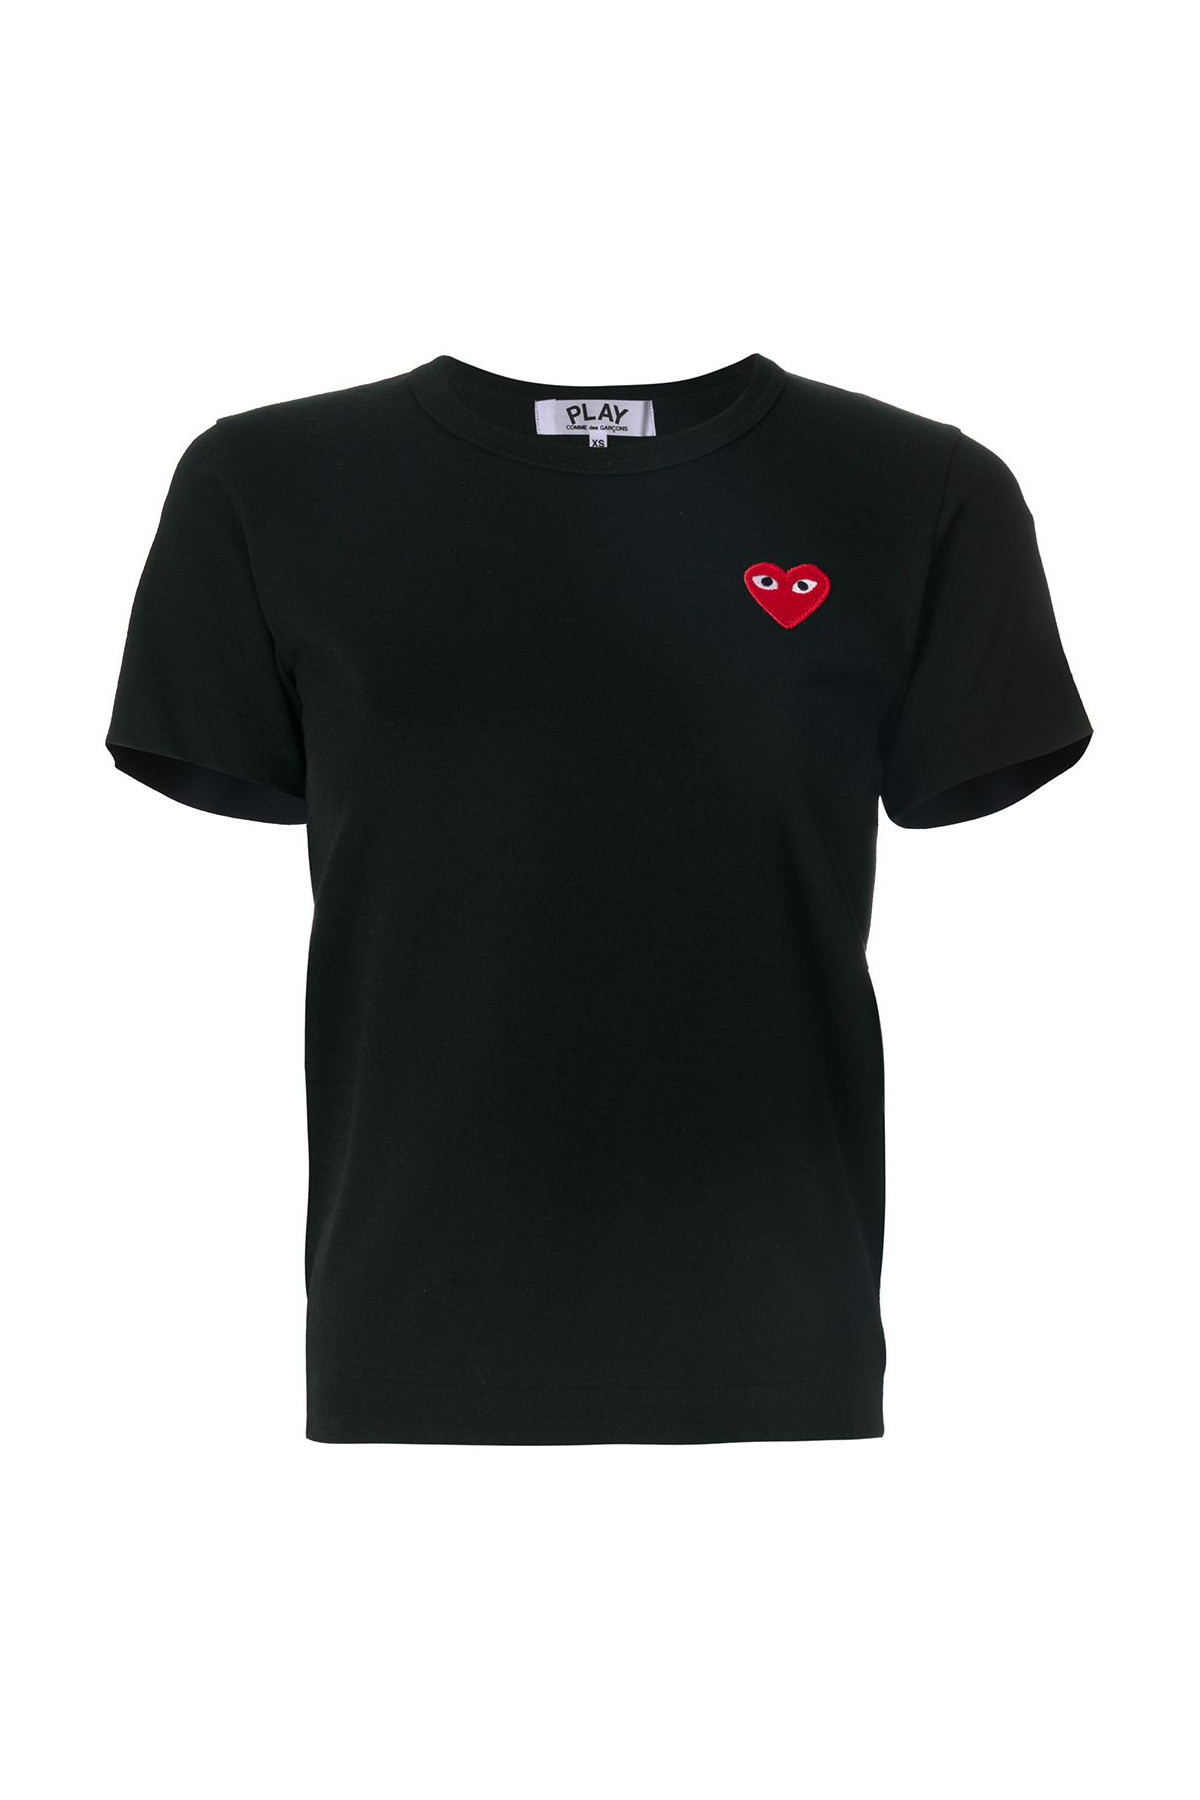 Play T-Shirt W Red Heart P1T107